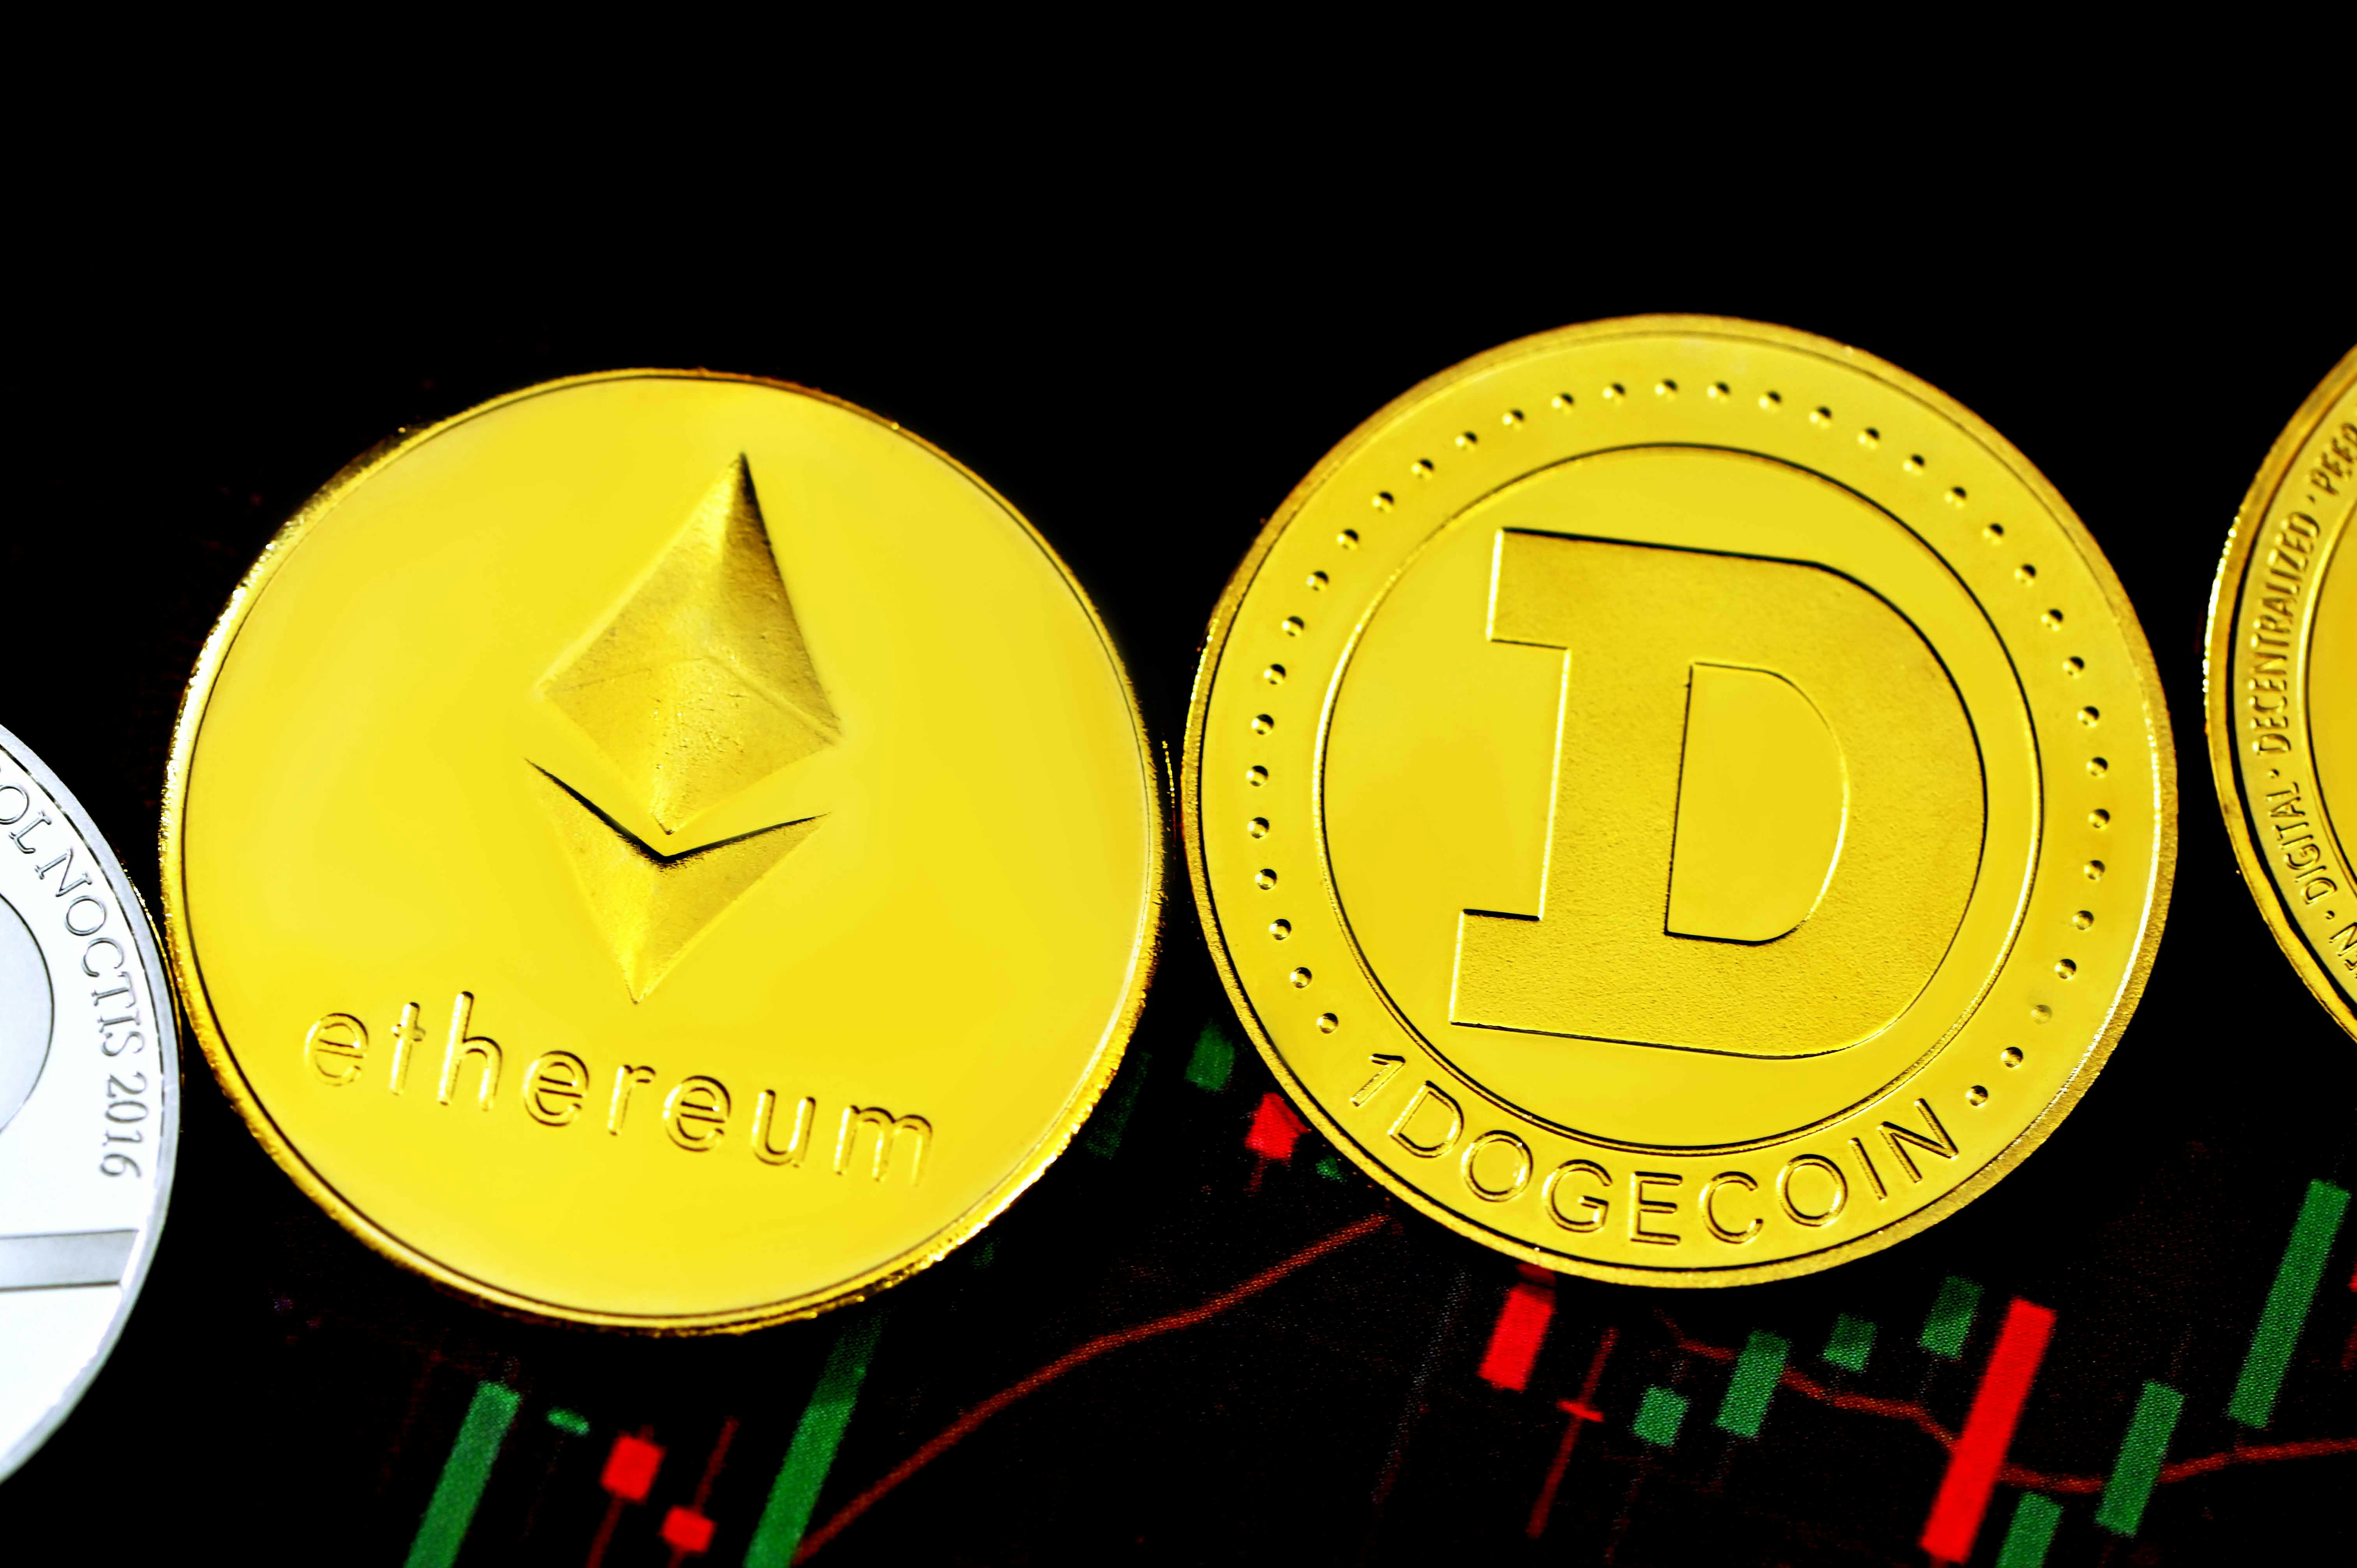 Ethereum coin and Dogecoin are together on a trading chart